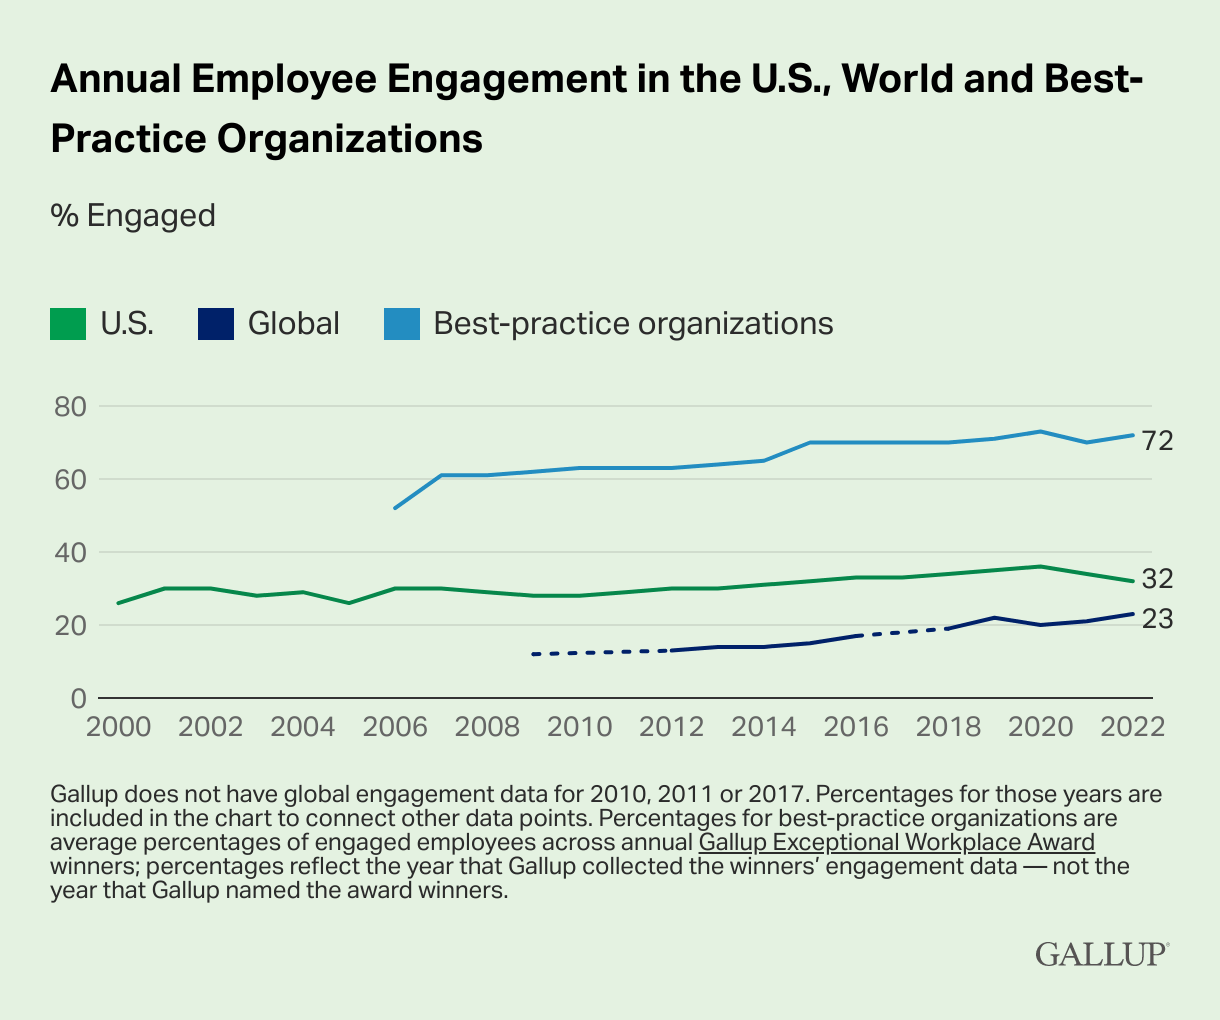 annual-employee-engagement-in-the-u.s.-world-and-best-practice-organizations-